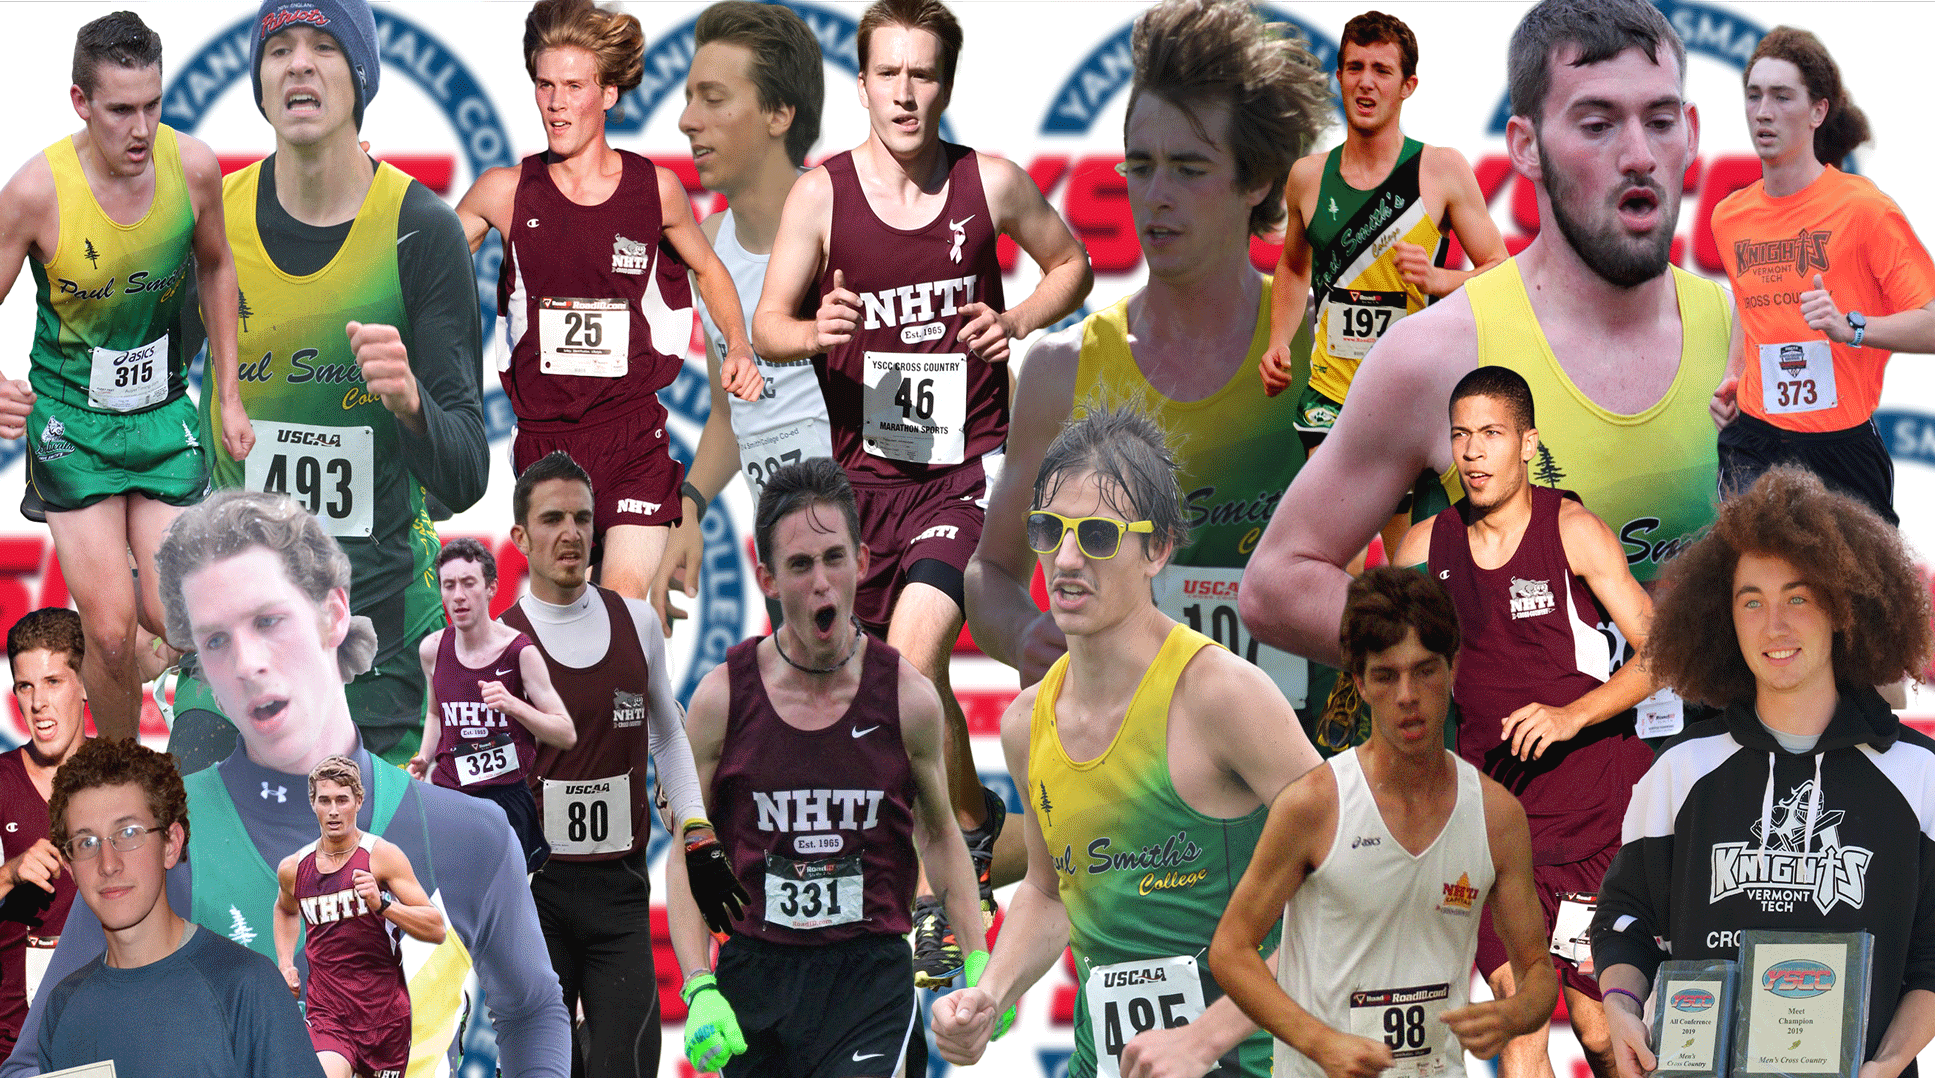 YSCC Men's Cross Country Twin Decades Team announced